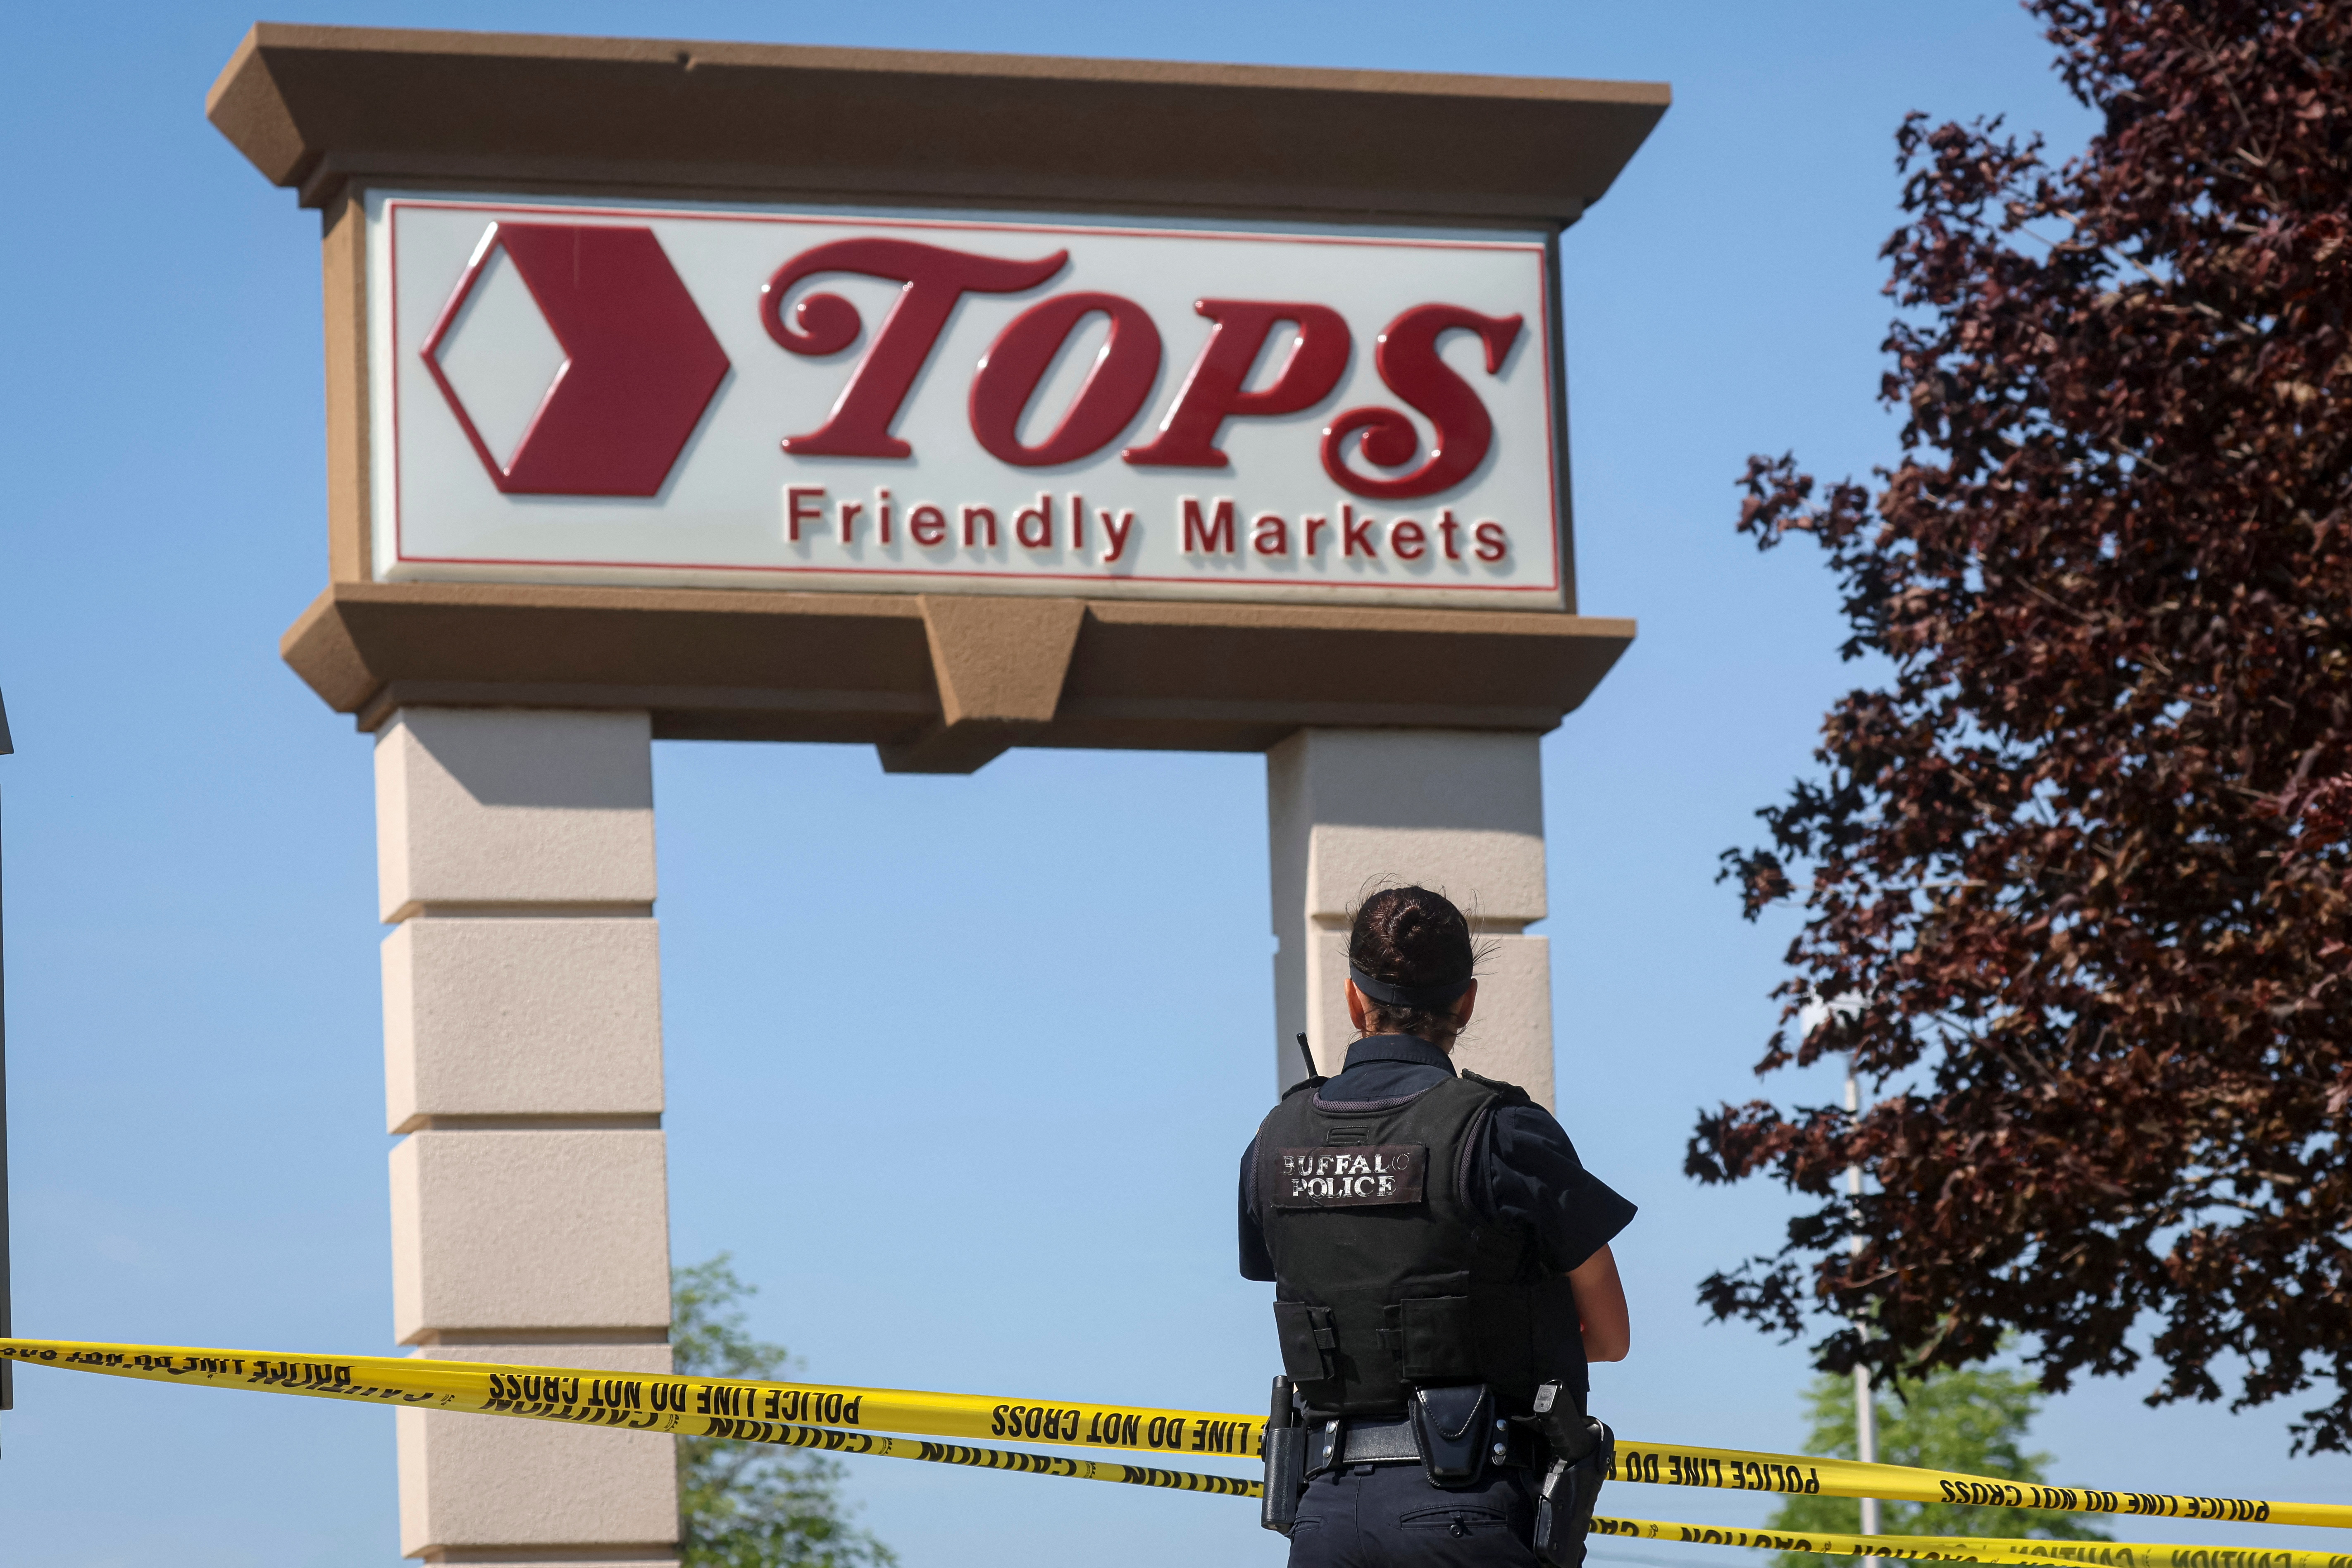 Scene of a shooting at a TOPS supermarket in Buffalo, New York